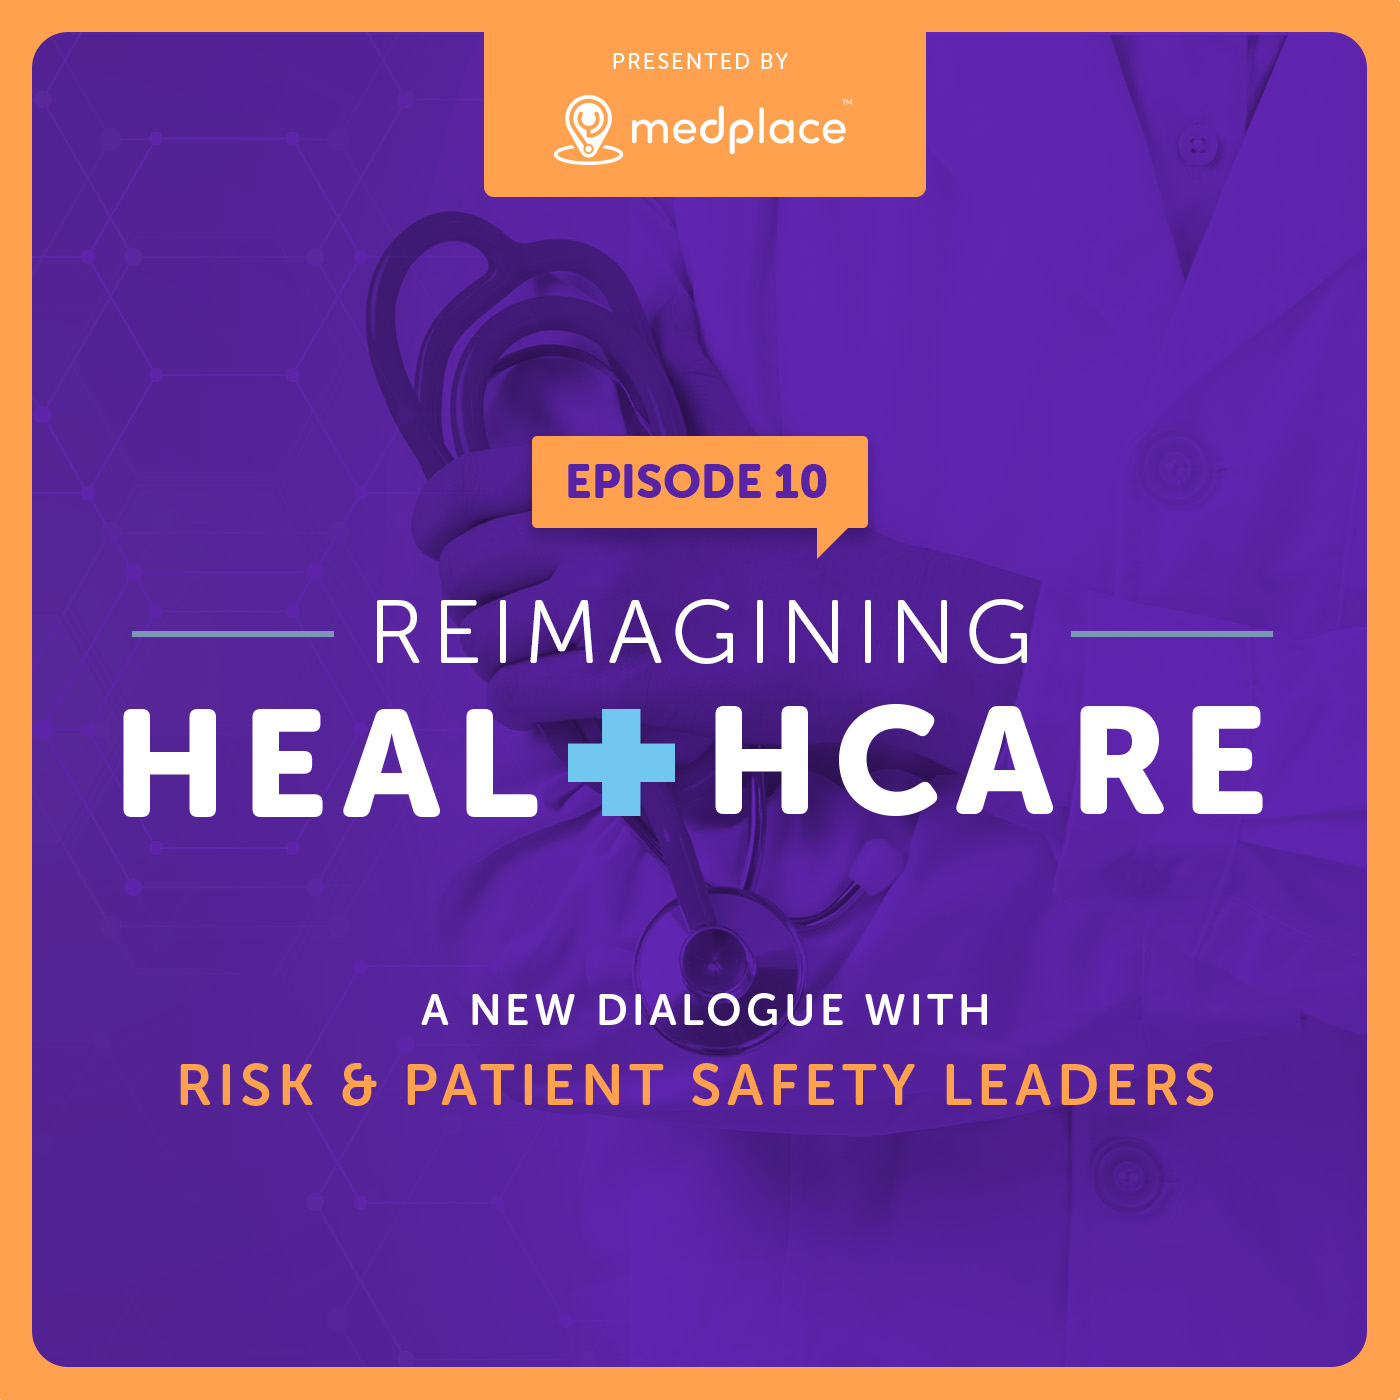 Episode 10 - Reimagining Healthcare - A New Dialogue with Risk and Patient Safety Leaders